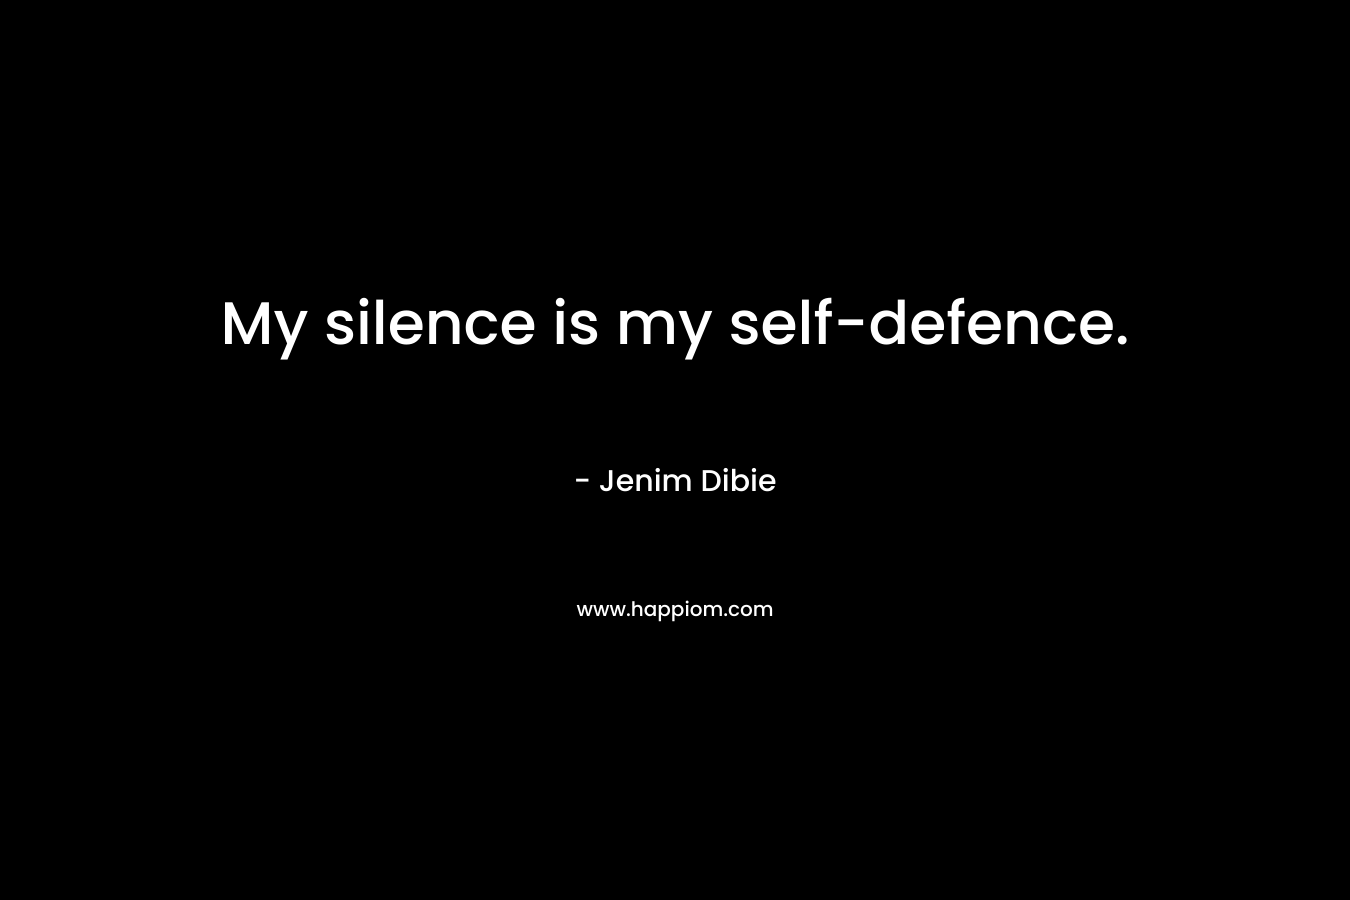 My silence is my self-defence.